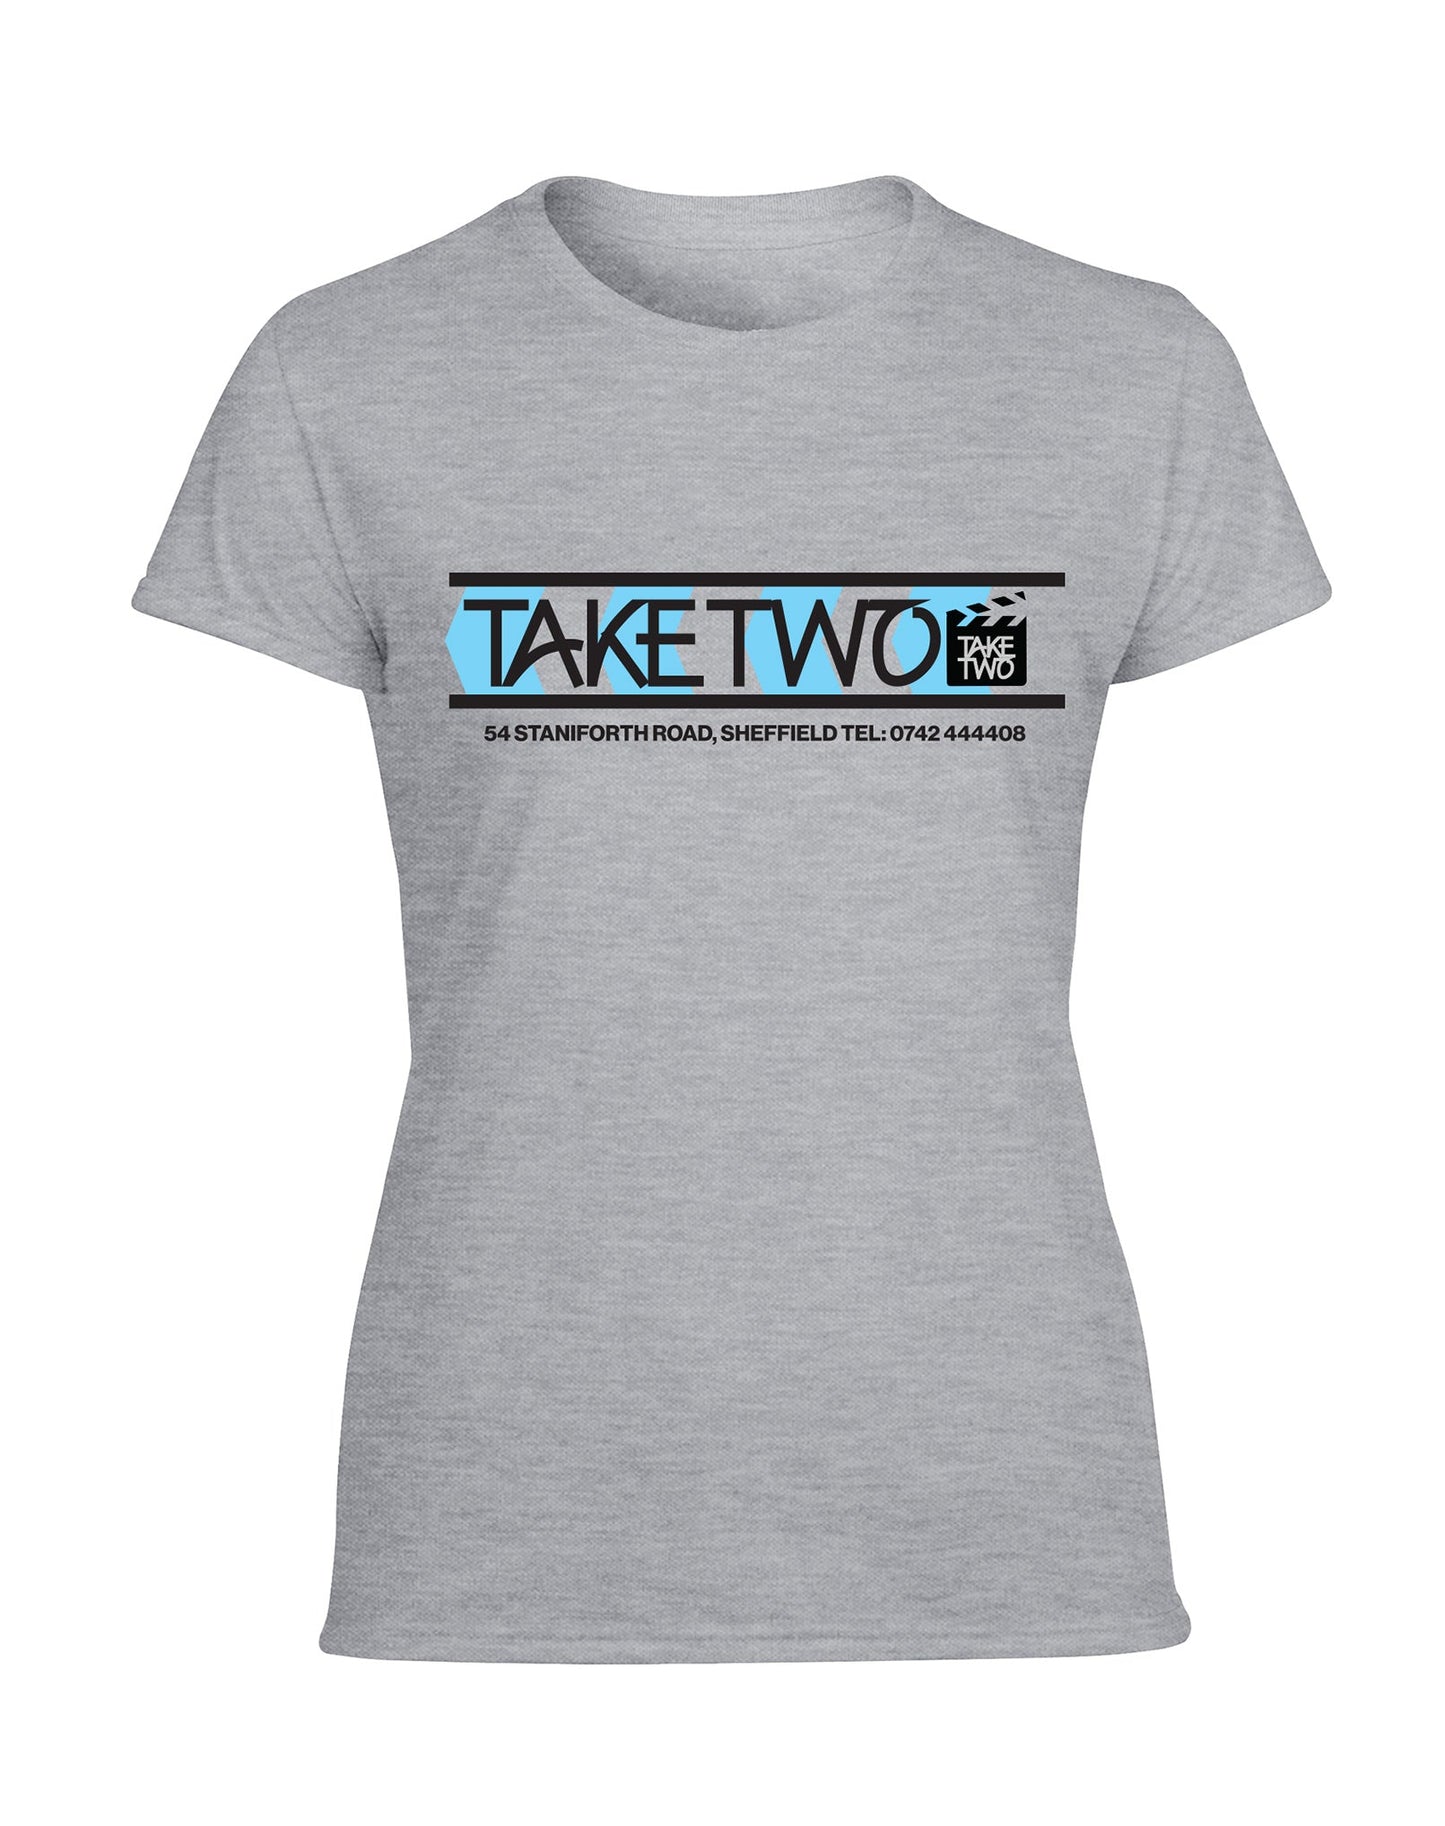 Take Two ladies fit t-shirt- various colours - Dirty Stop Outs